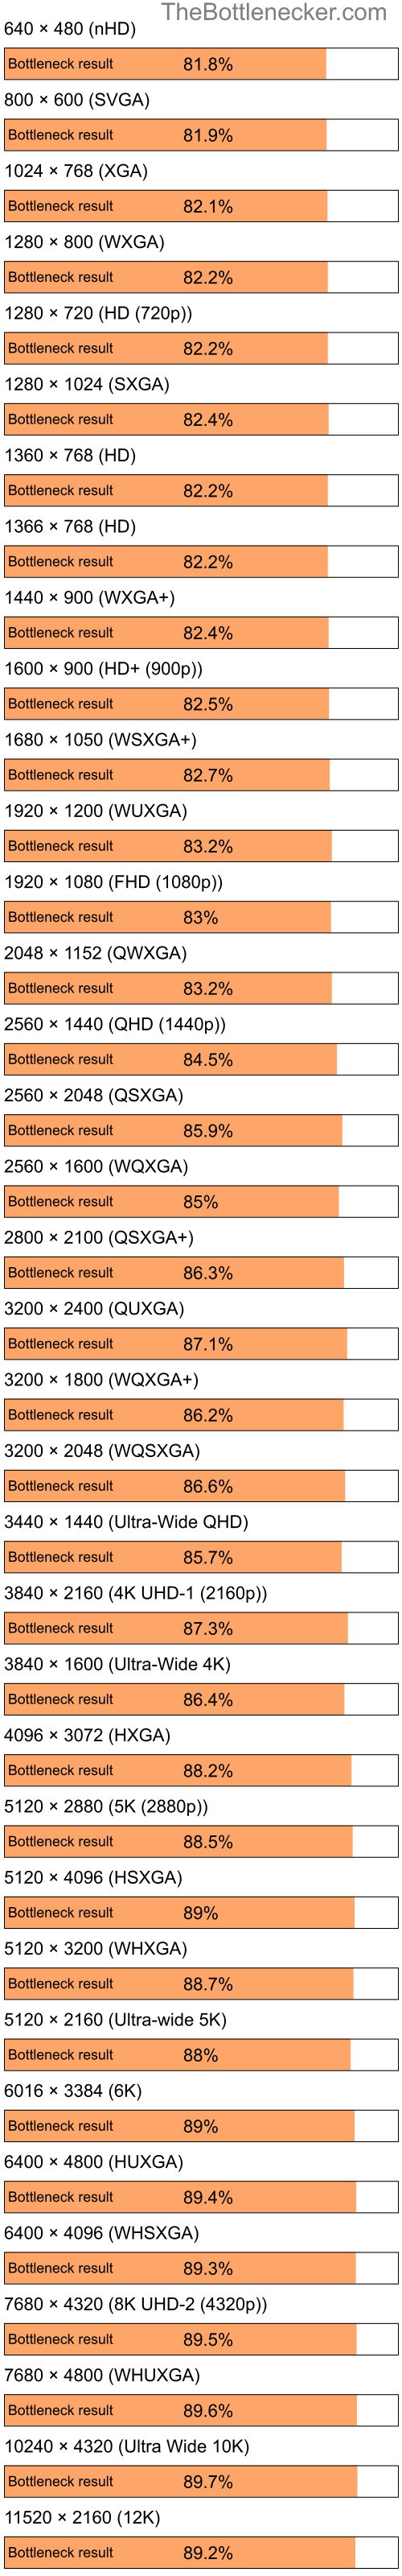 Bottleneck results by resolution for Intel Pentium 4 and NVIDIA GeForce 7150M in General Tasks